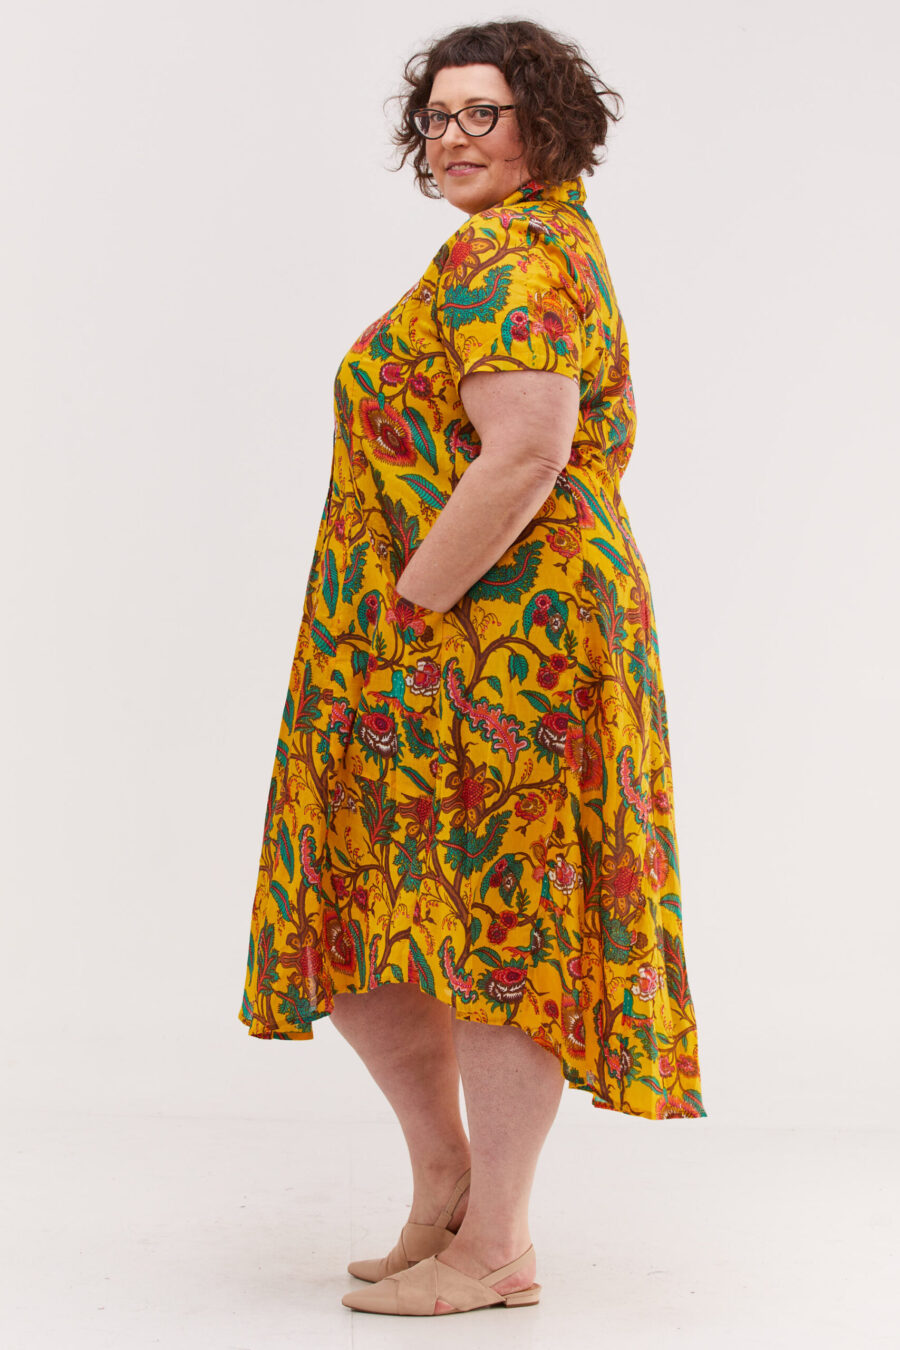 Aiya’le dress | Uniquely designed oversize dress - Yellow flora print, yellow dress with colorful floral print by comfort zone boutique